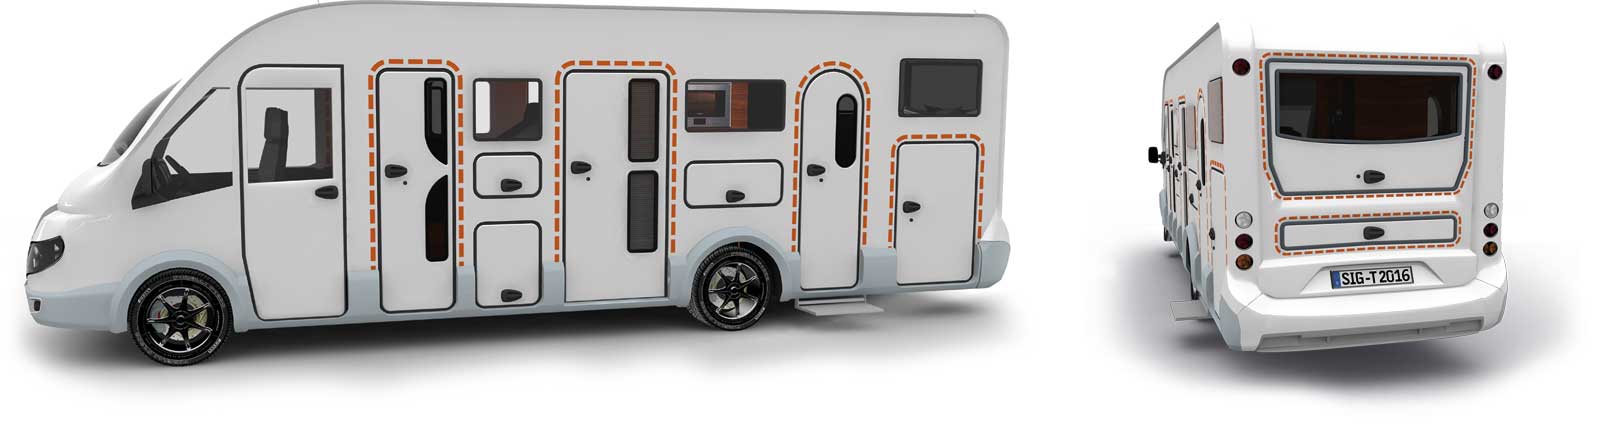 Satisfied tegos customers with Sunlight caravans and RVs